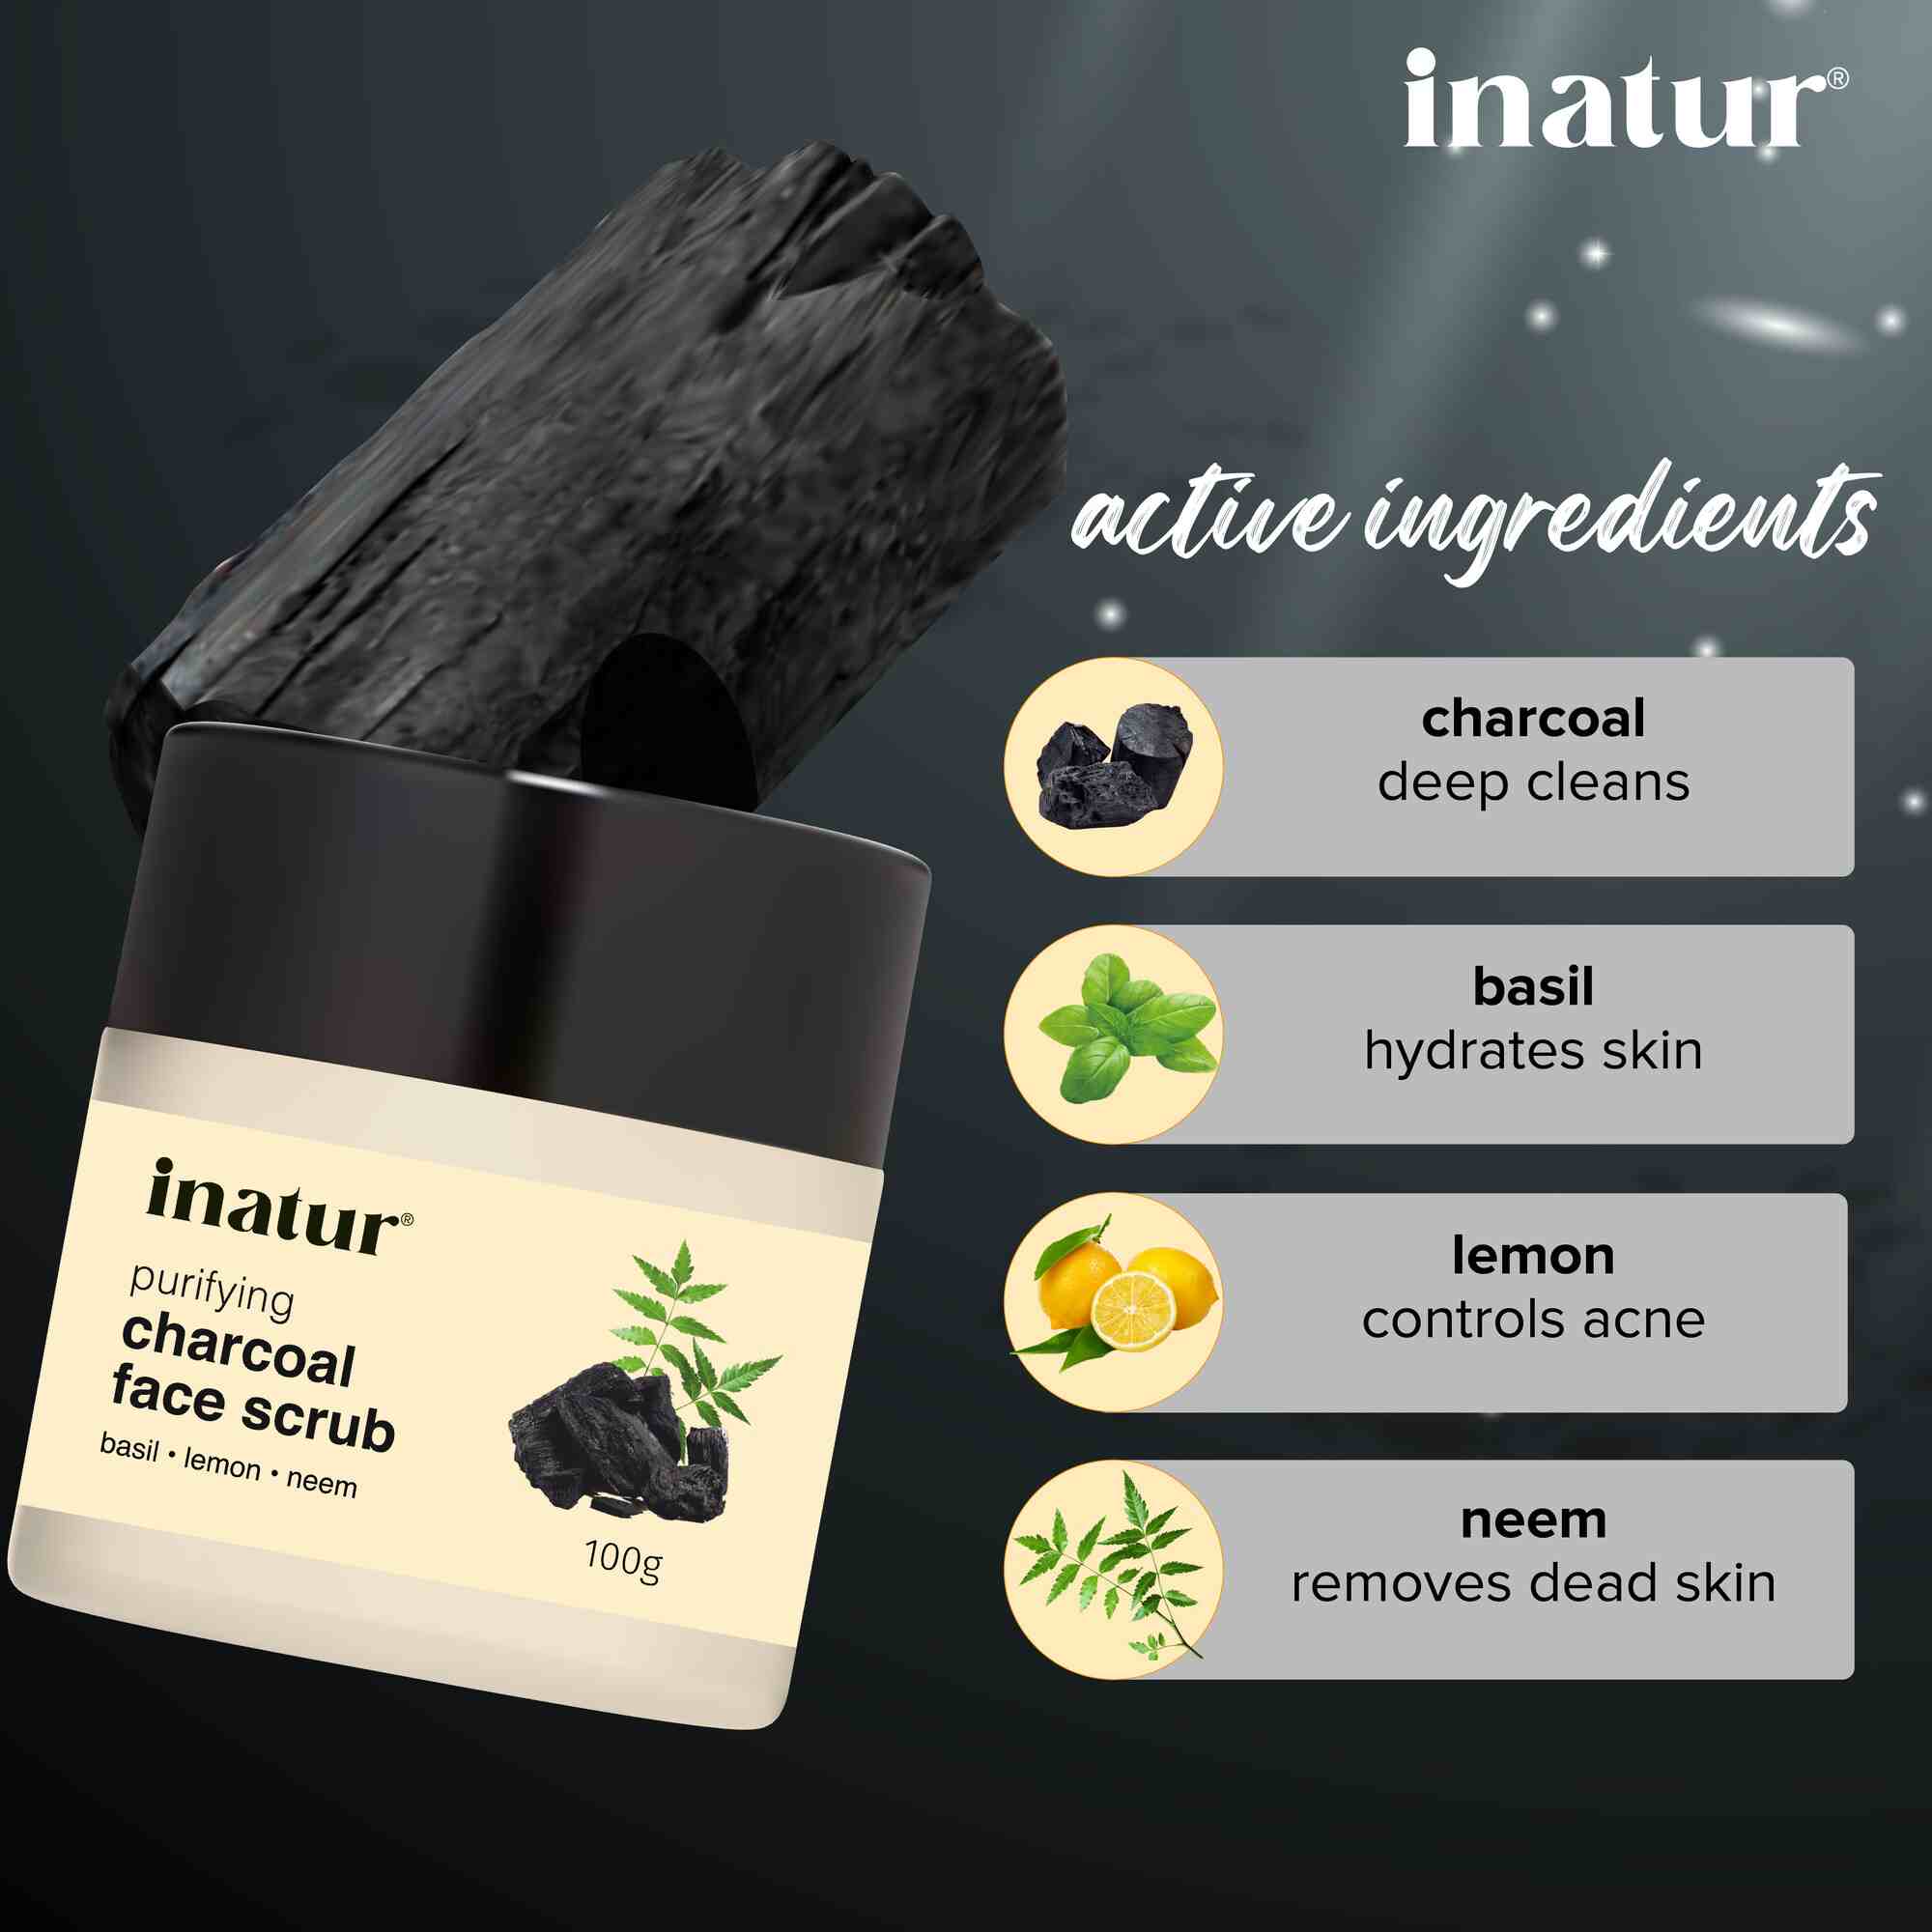 active ingredients of charcoal face scrub